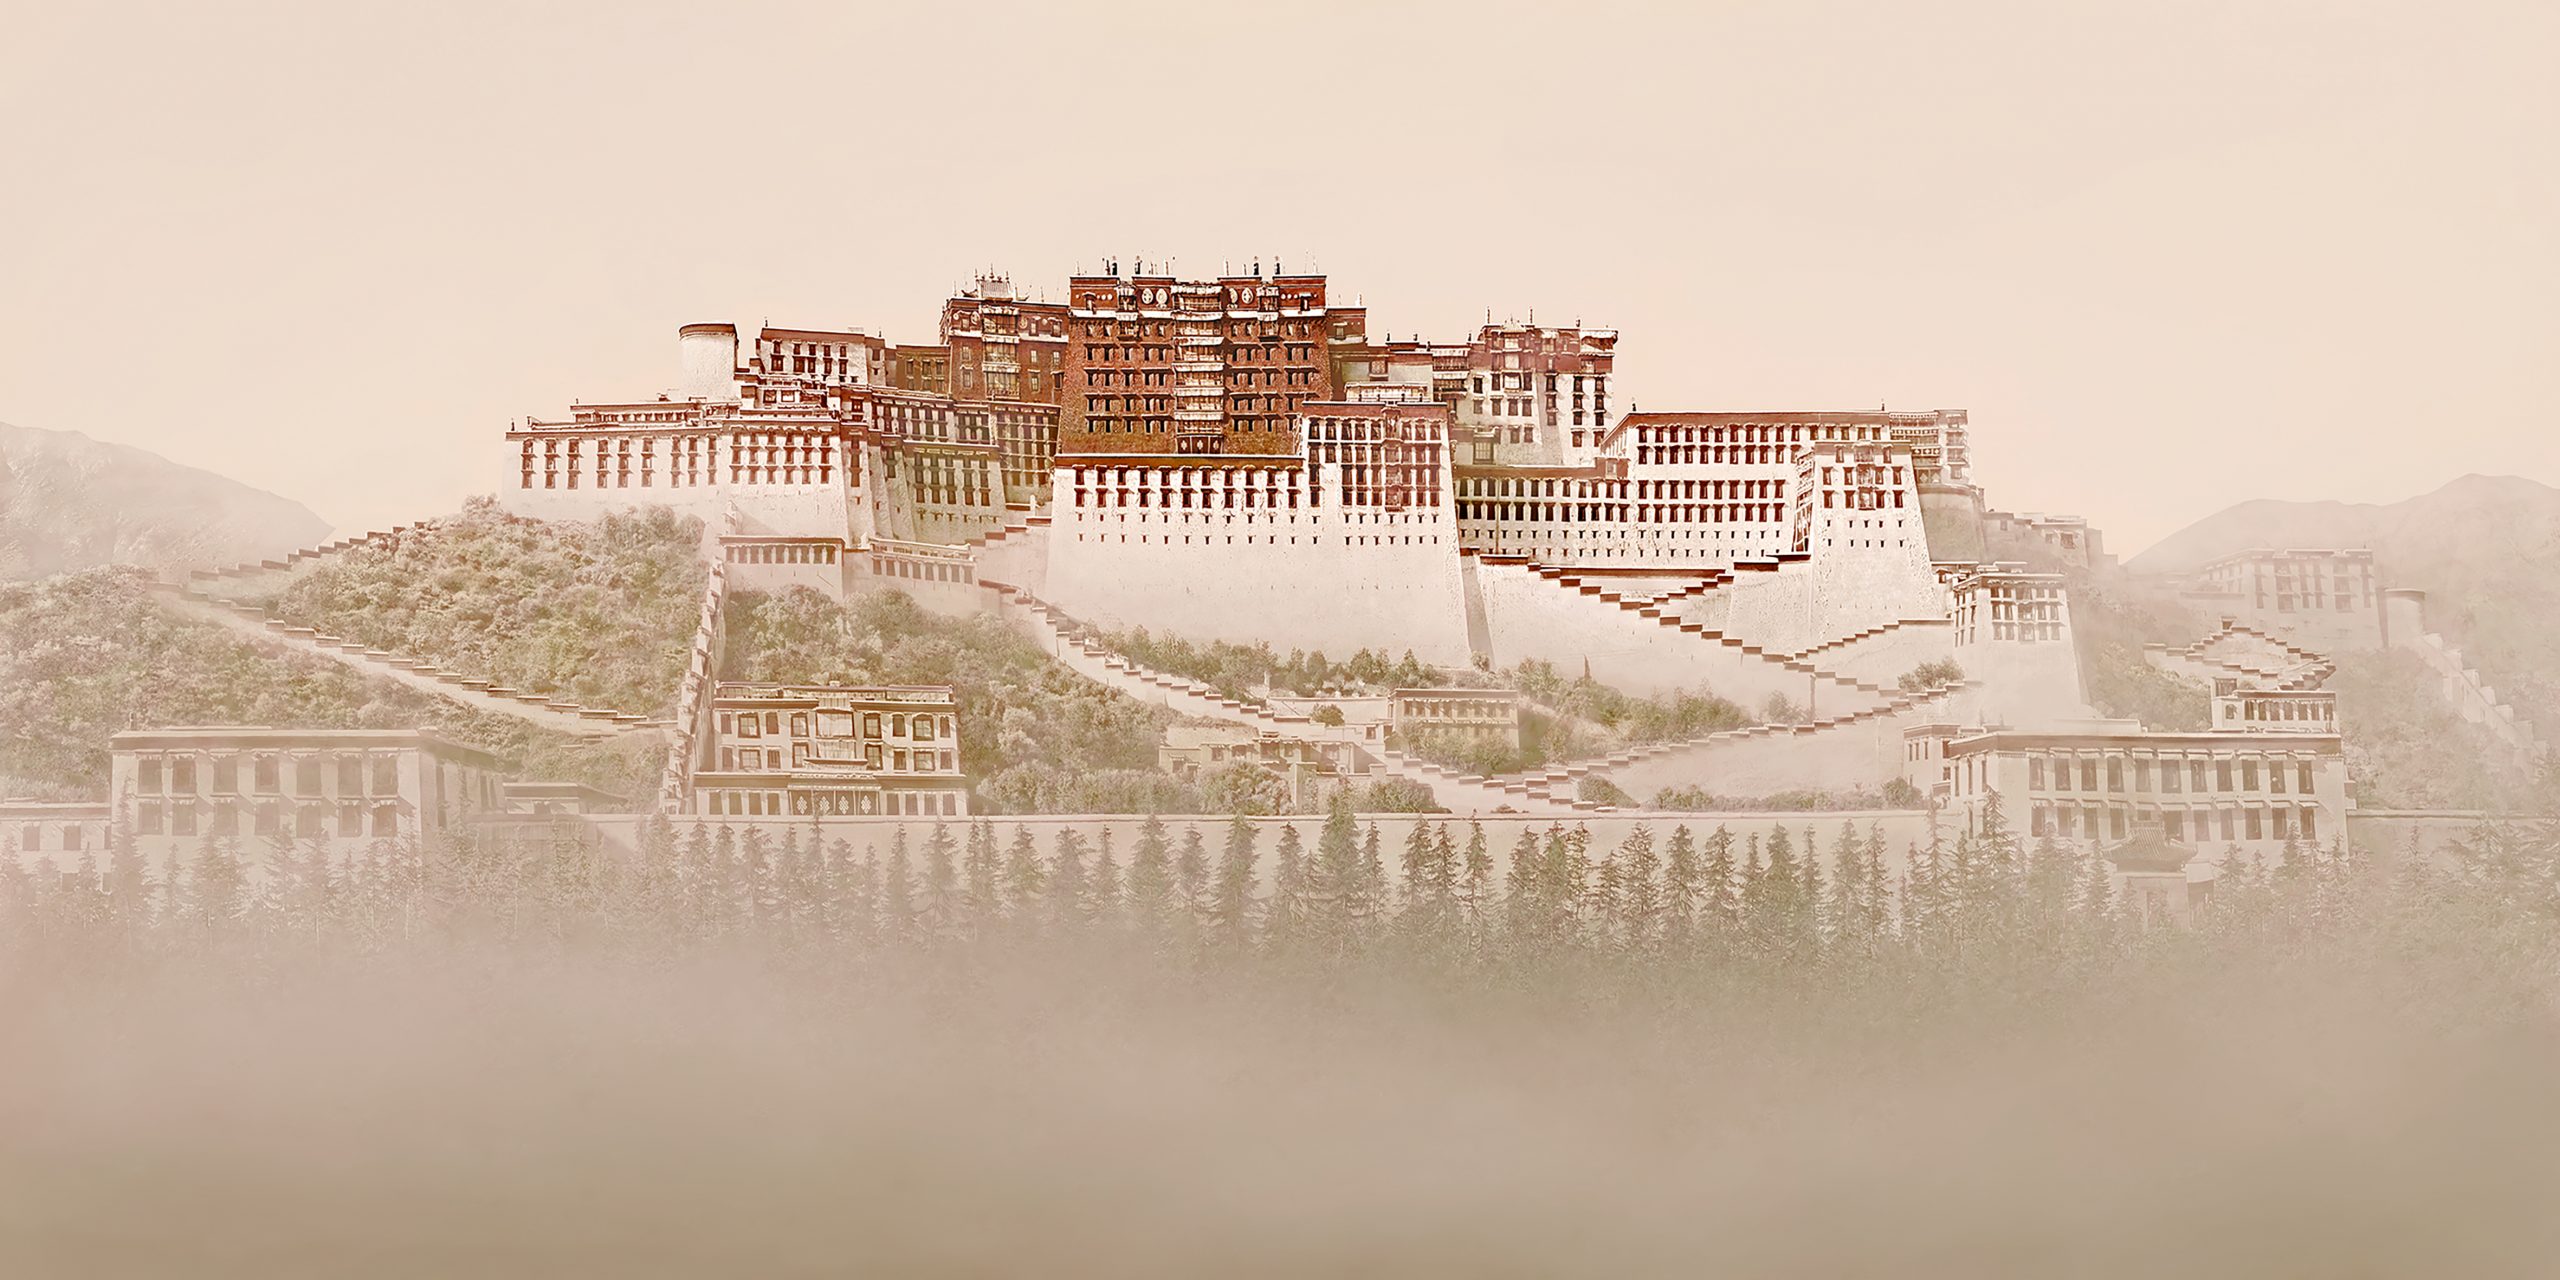 ©Irene Kung. Potala / Winter Palace or Winter Abode, 2021 D-print on rag paper Edition of 8 200 x 100 cm